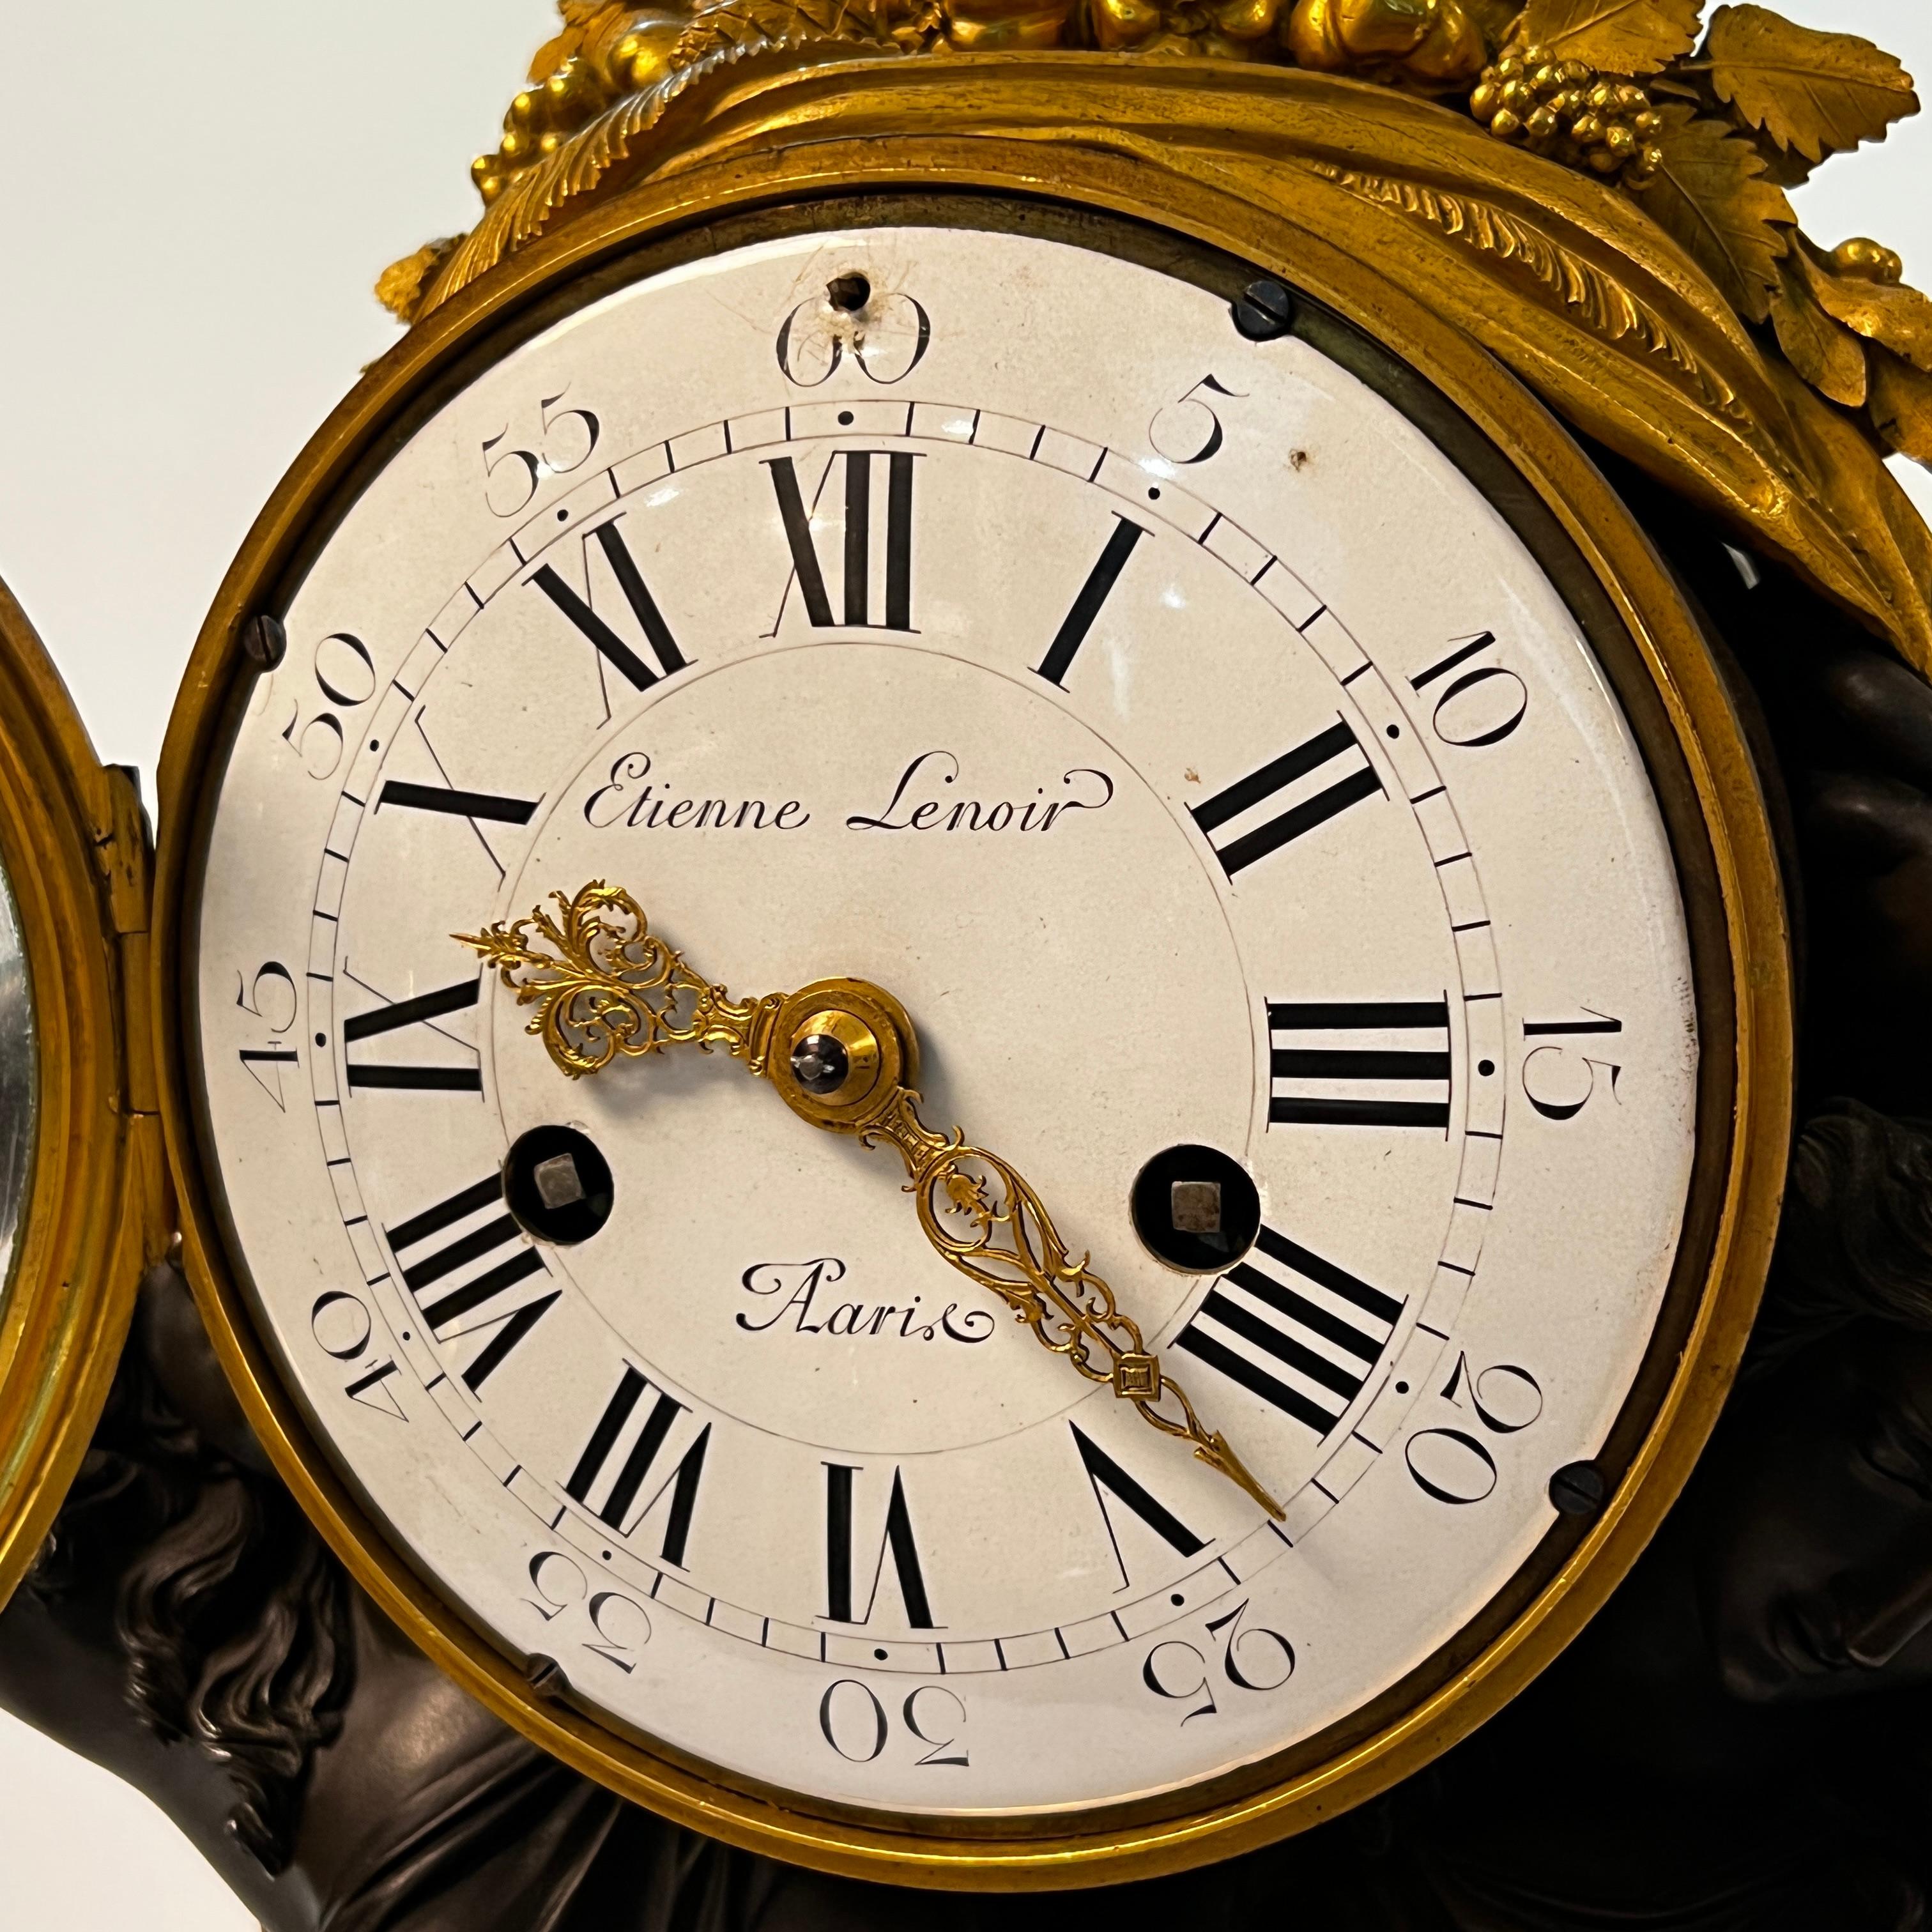 Our Louis XVI style clock in the manner of Louis Simon Boizot (1743-1809) features the patinated figures of neoclassical standing females supporting the clock face, ormolu gilt surfaces and porcelain dial with Roman numerals. With twin train